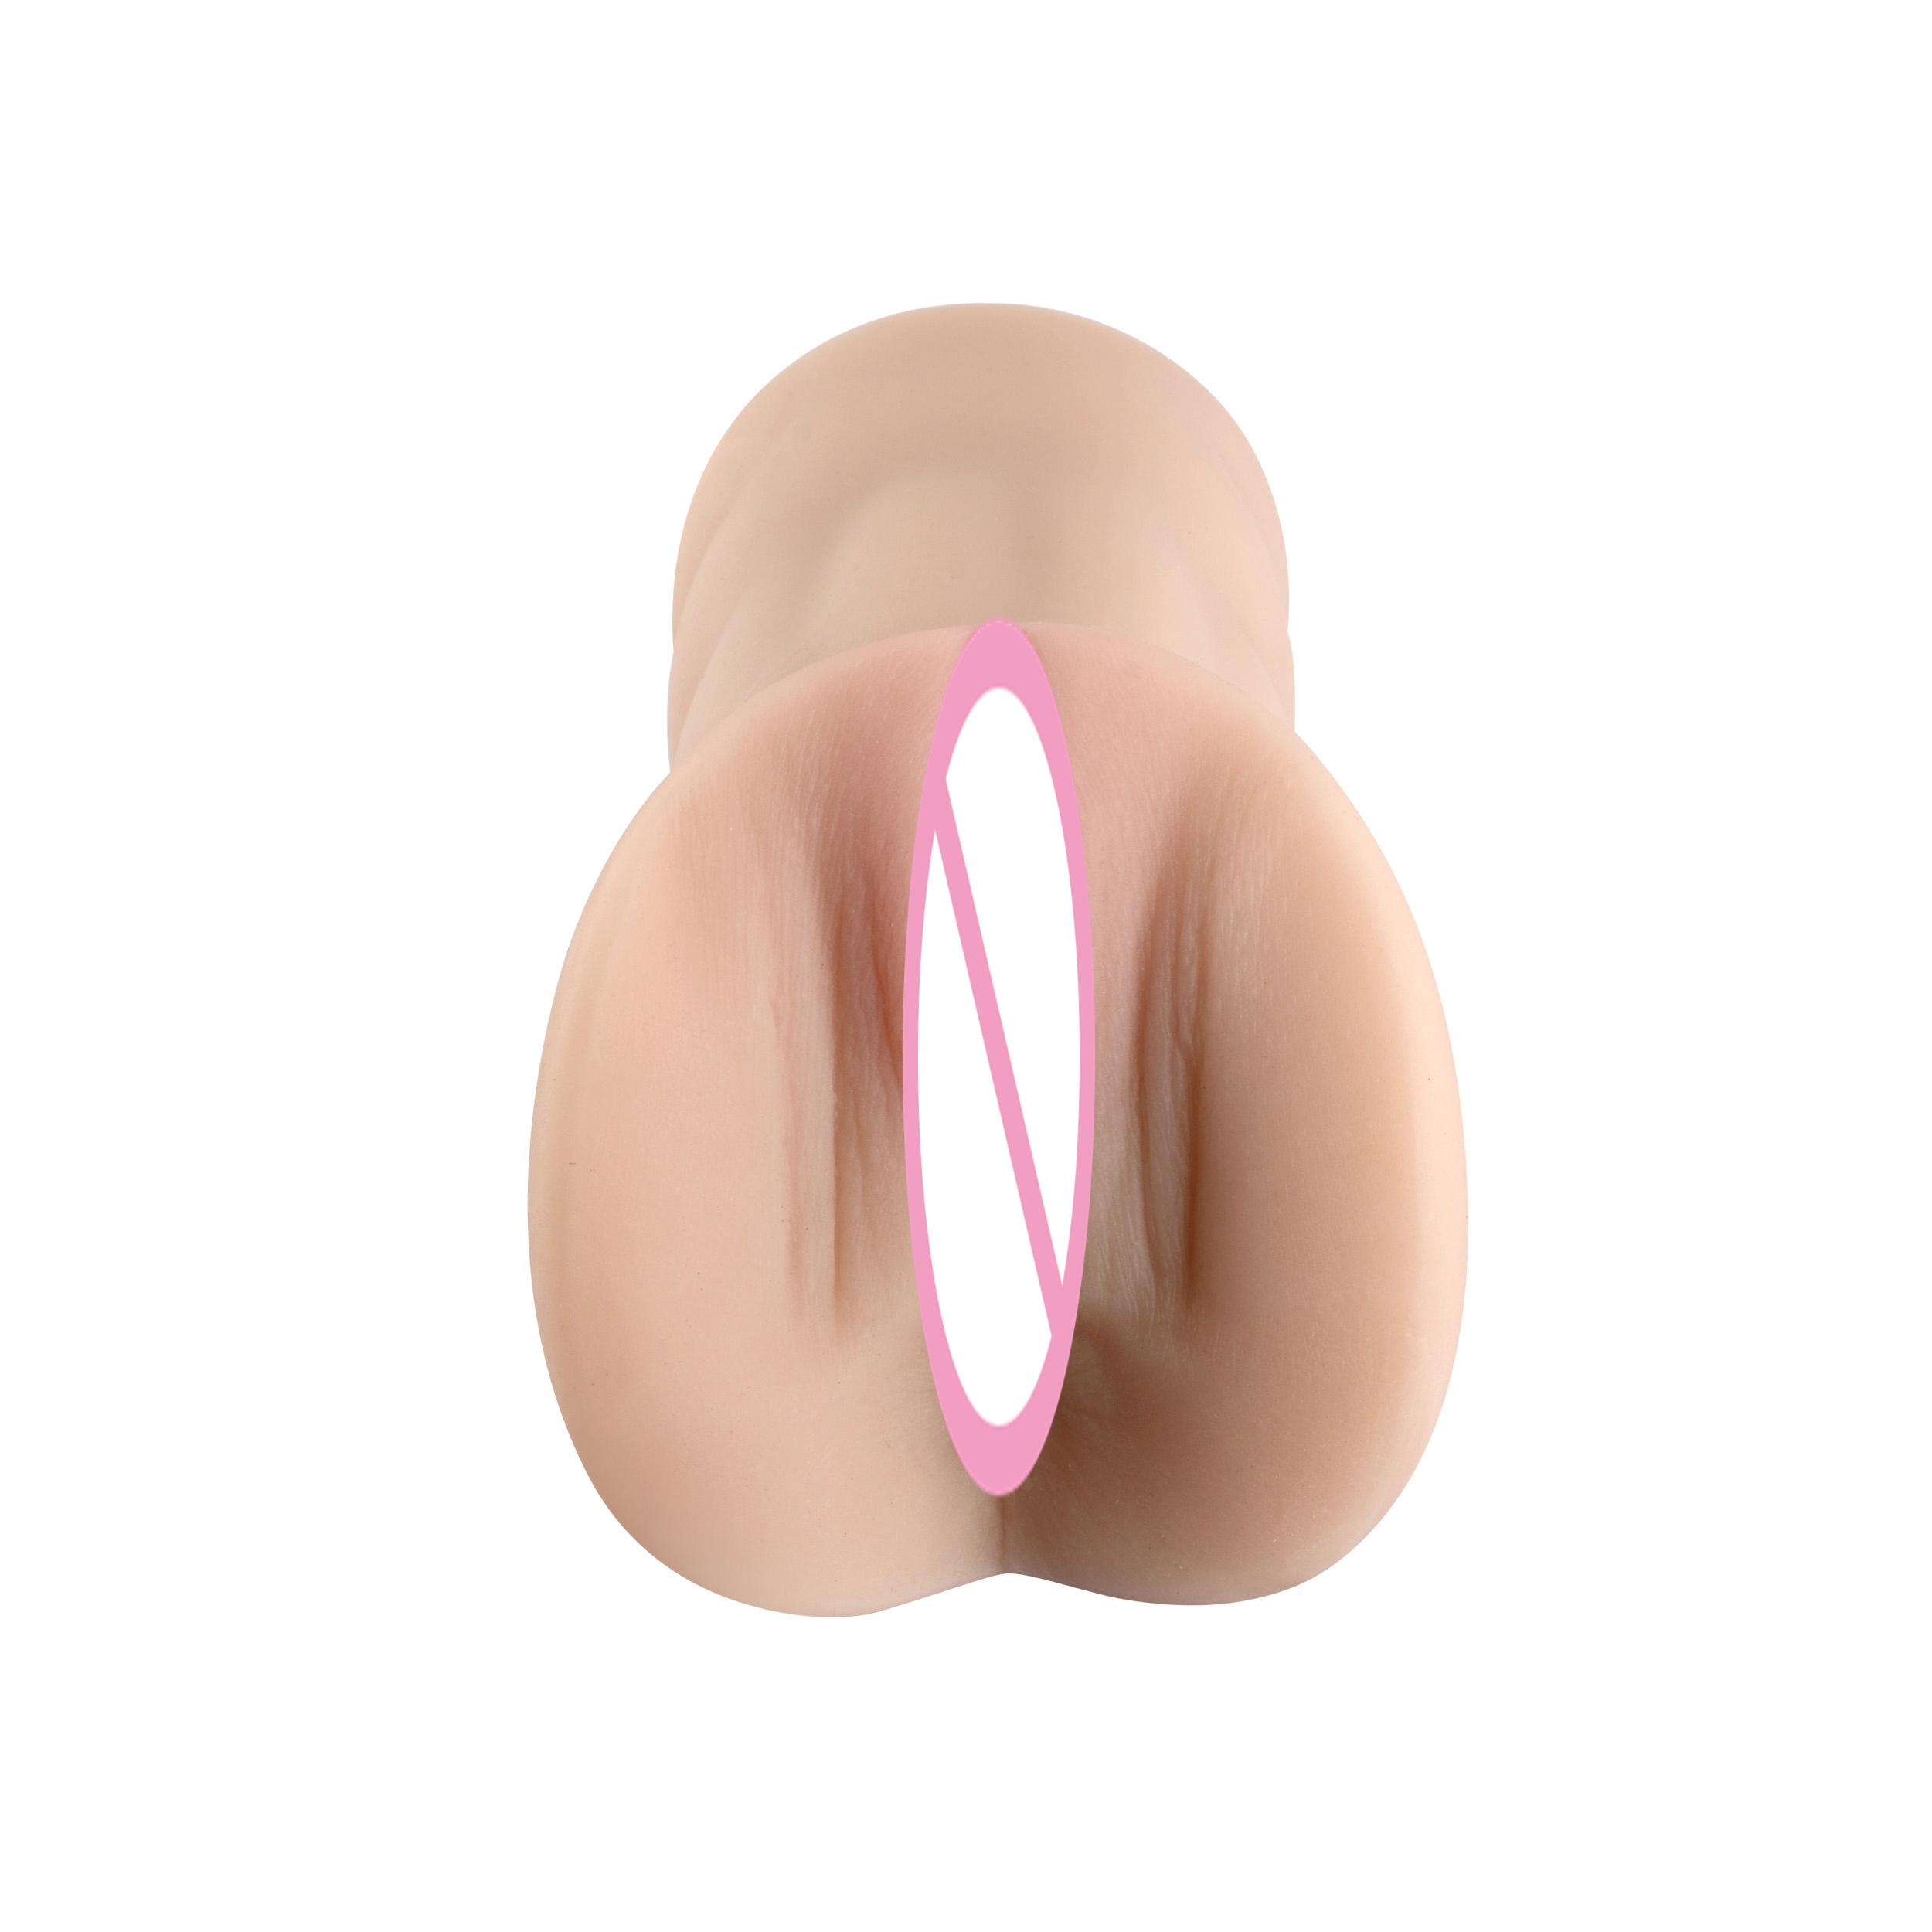  Soft Sex Doll With Realistic Textured Tight Anus Masturbator And Mouth Vagina Deep Throat Oral Adult Sex Toys For Men